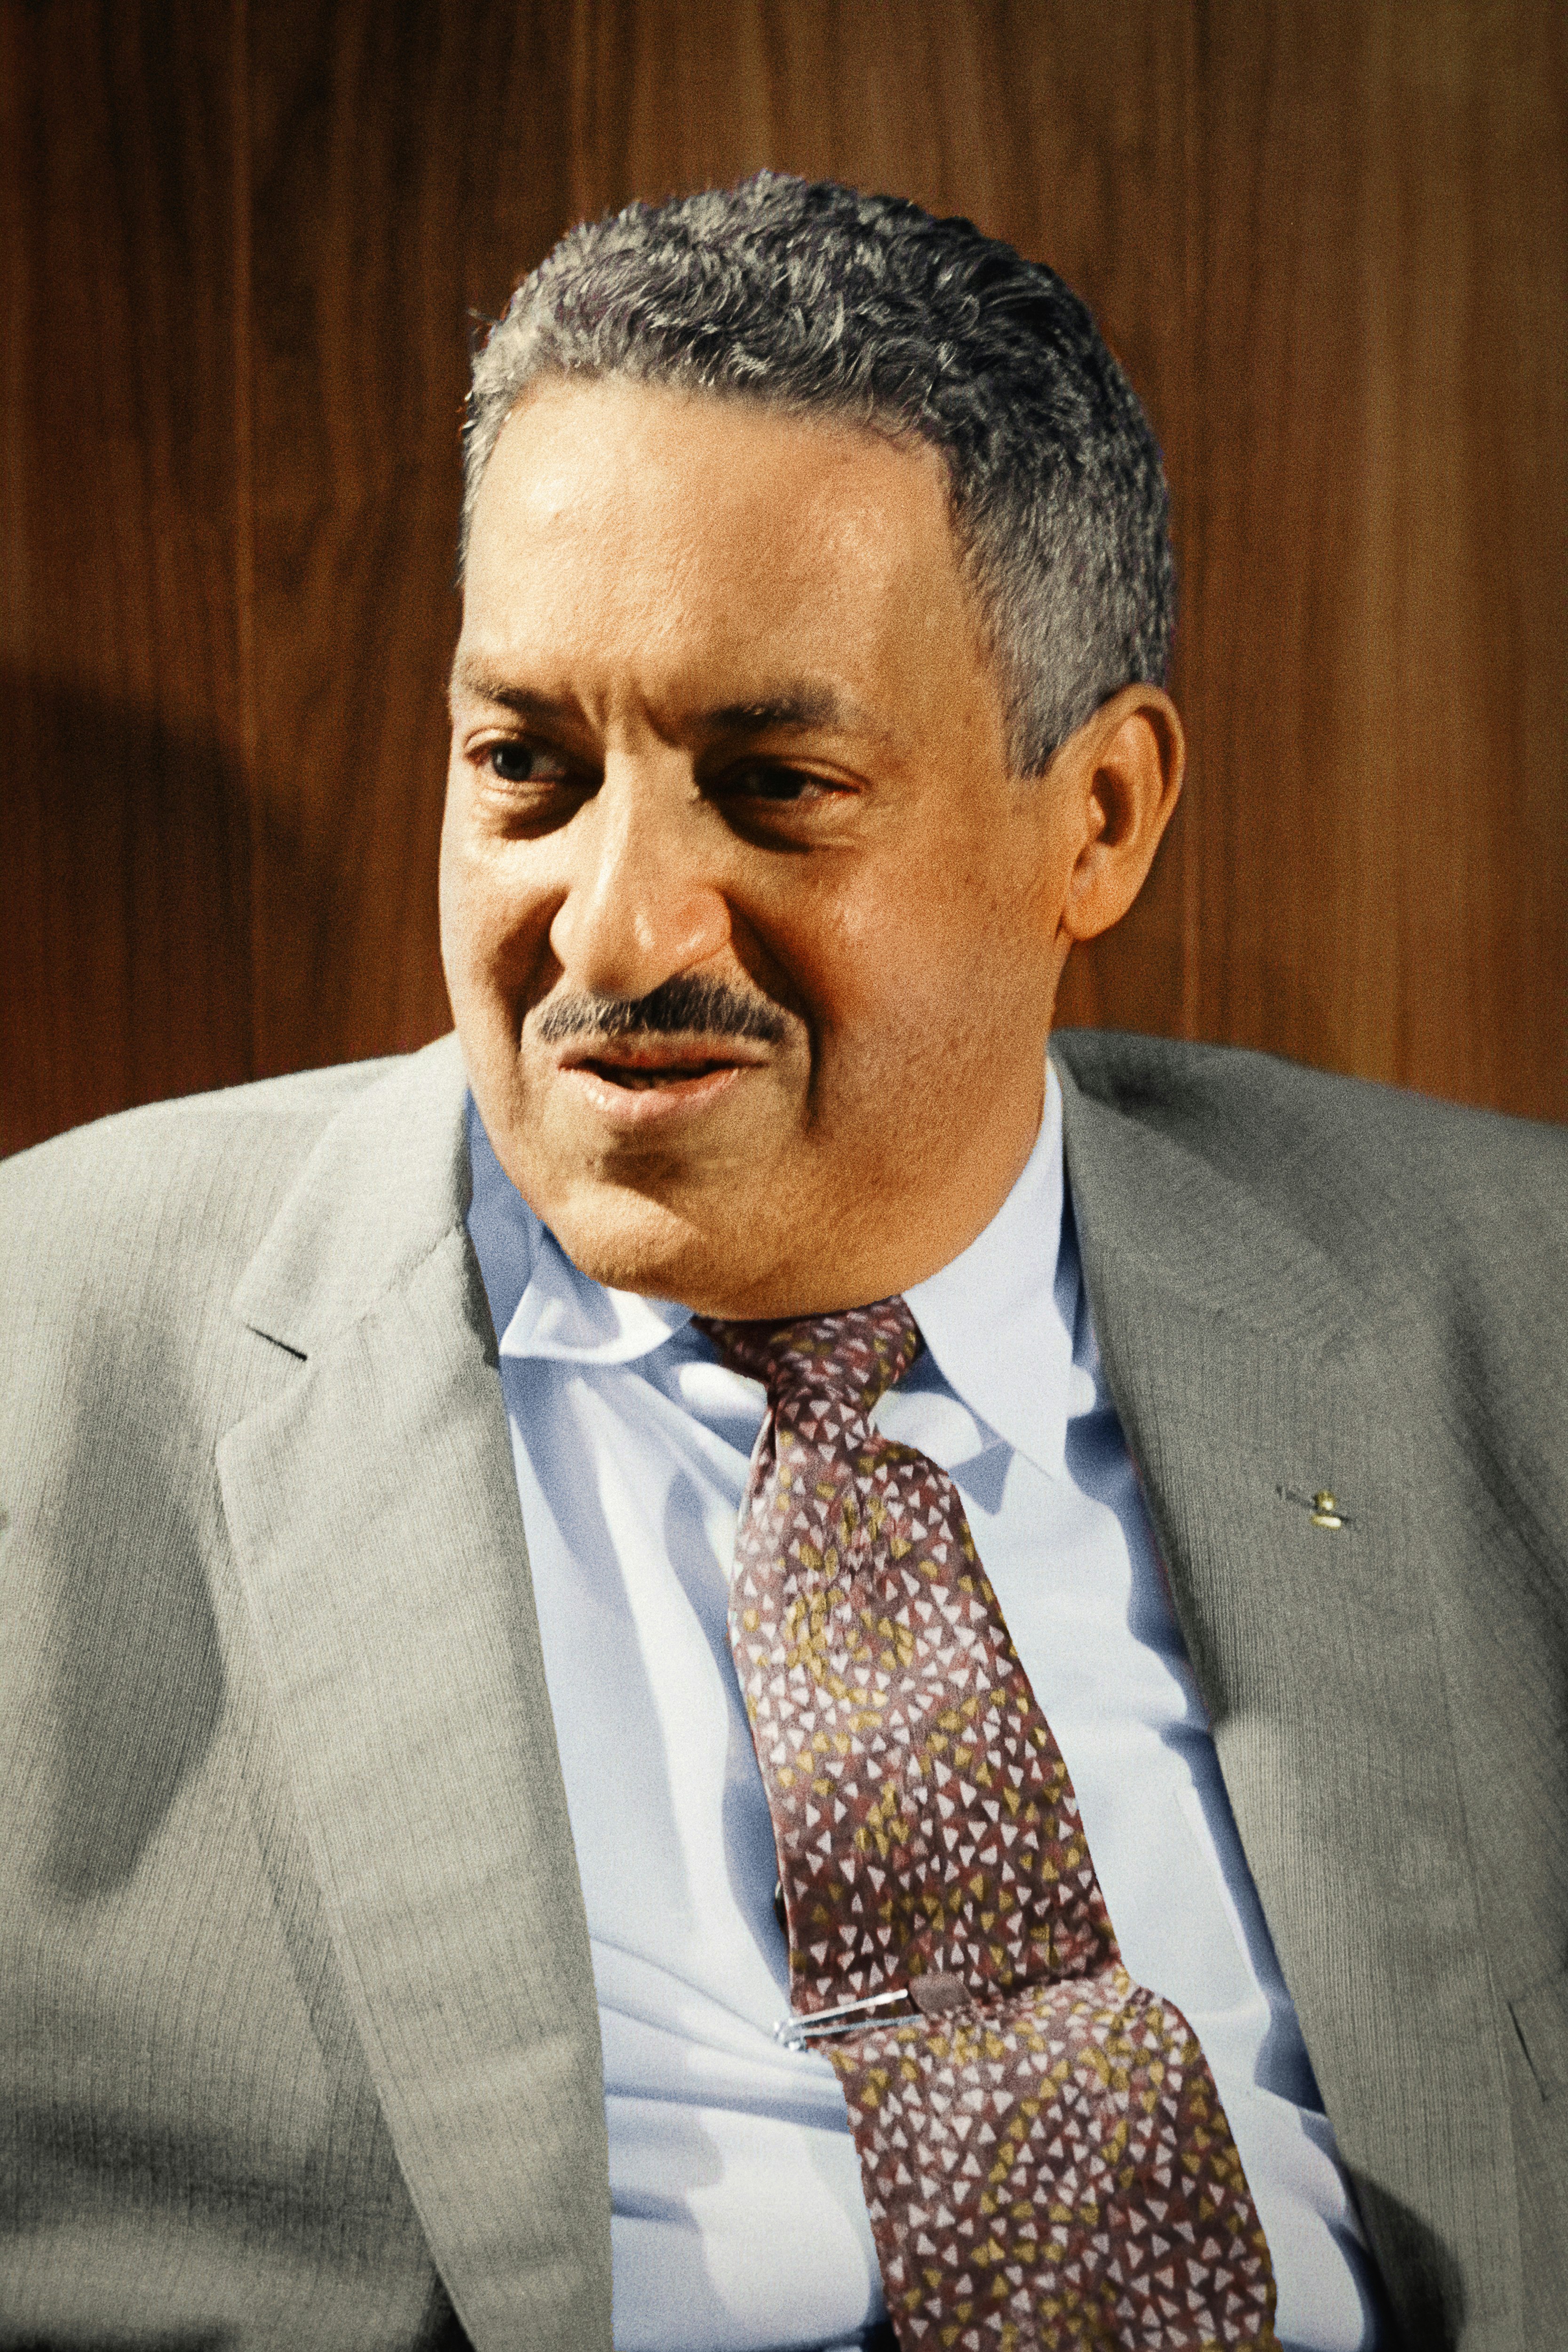 Caption reads, "Thurgood Marshall, attorney for the NAACP / [TOH]." Original black and white negative by Thomas J. O'Halloran. Taken September 17th, 1957, Washington D.C, United States (@libraryofcongress). Colorized by Jordan J. Lloyd. Library of Congress Prints and Photographs Division Washington, D.C. 20540 USA https://www.loc.gov/item/2003688132/